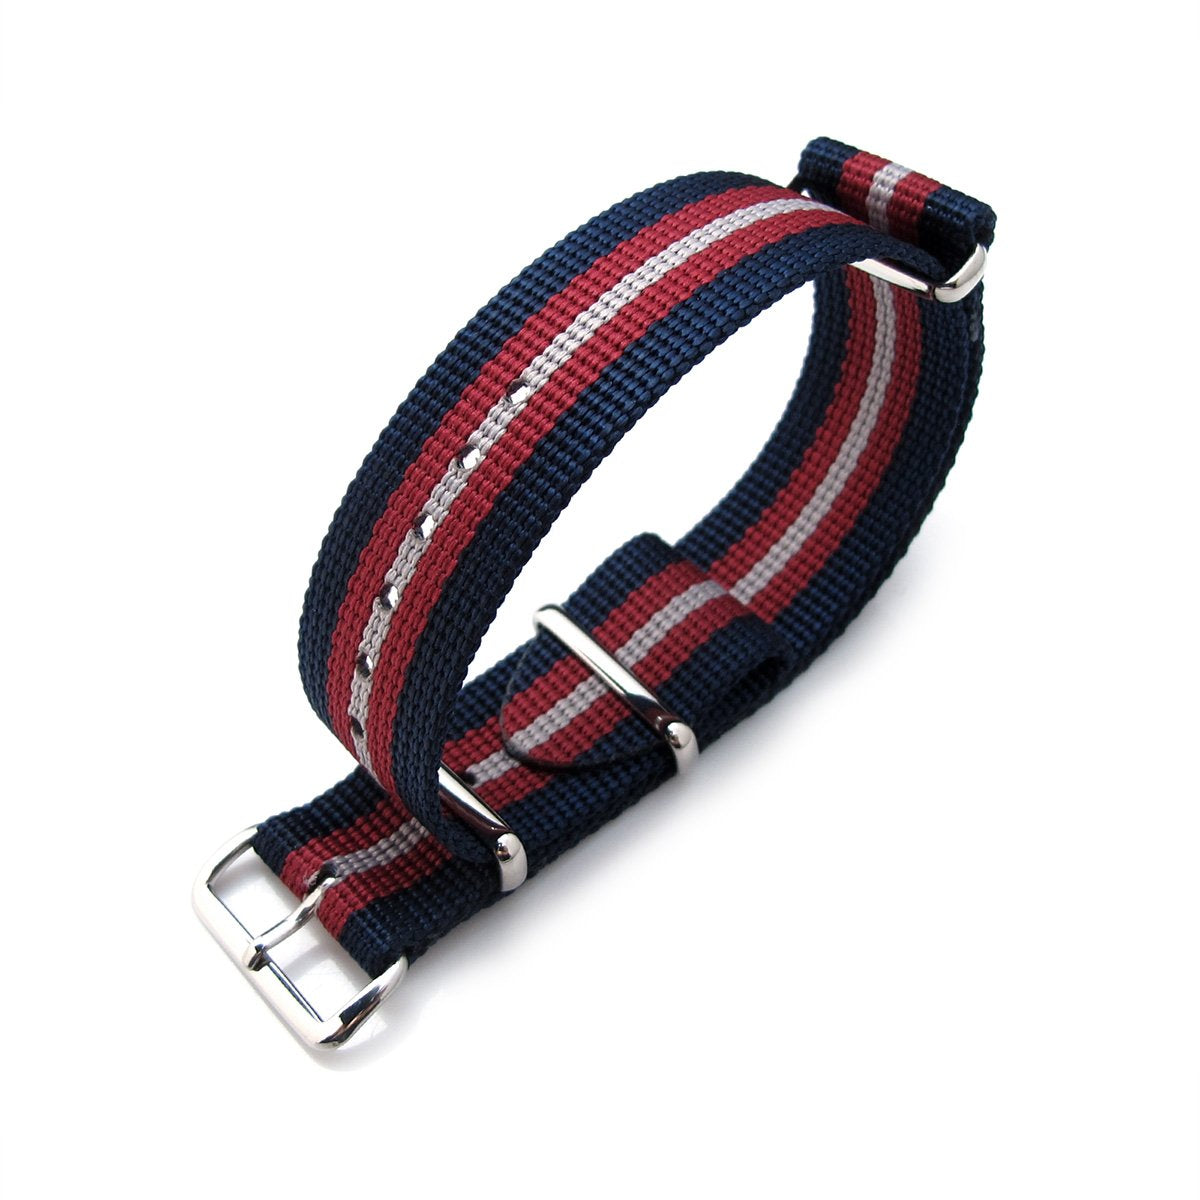 MiLTAT 20mm 21mm or 22mm G10 NATO Bullet Tail Watch Strap Ballistic Nylon Polished Blue Red &amp; Grey Stripes Strapcode Watch Bands